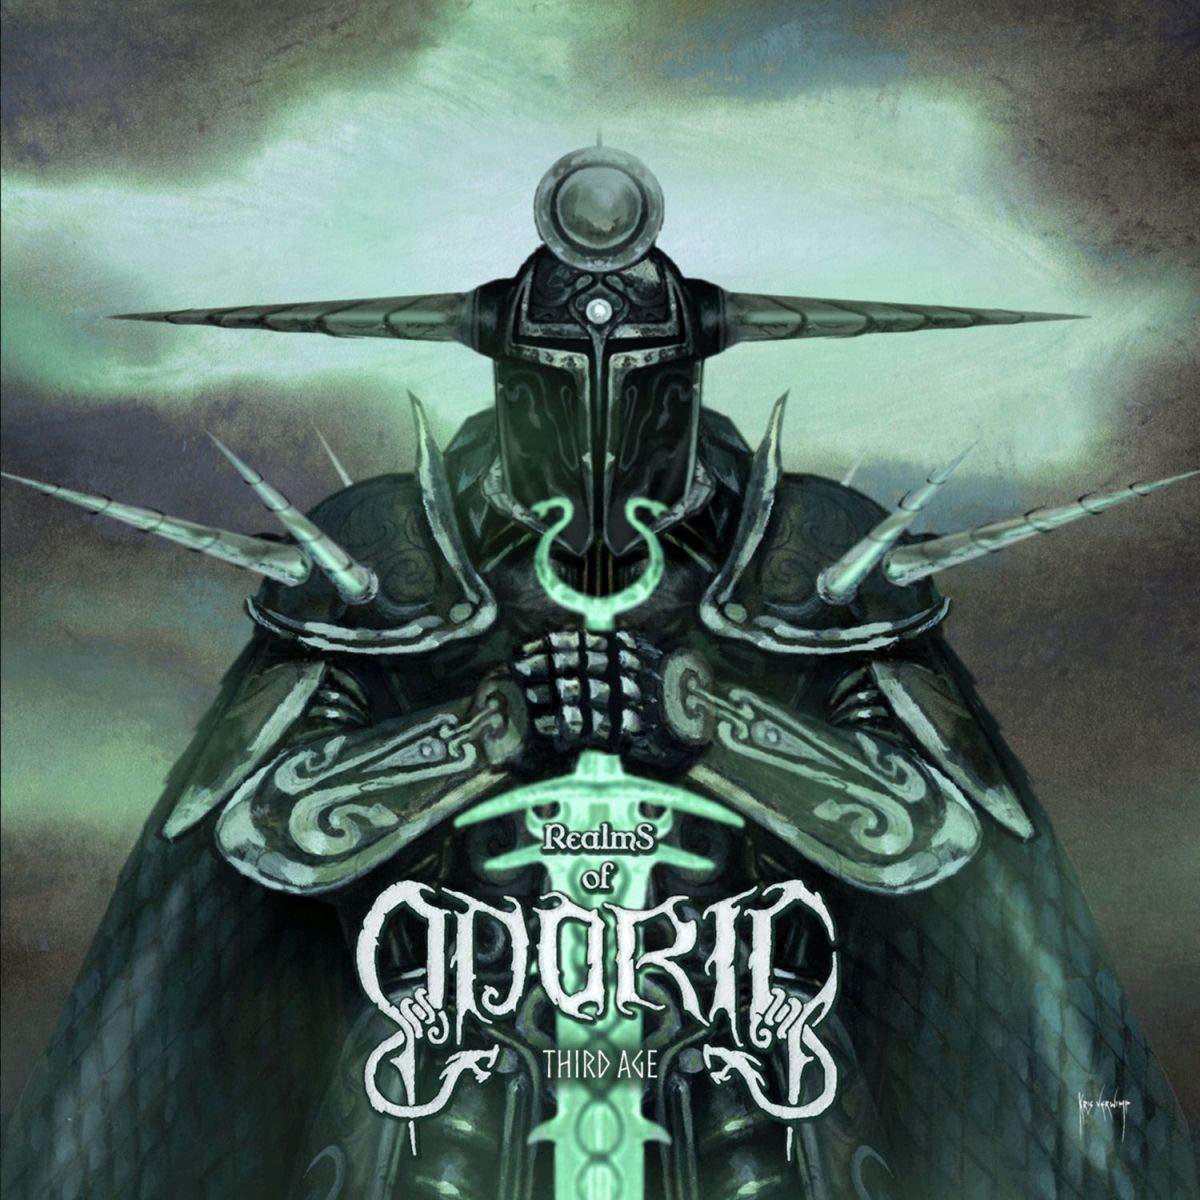 Realms Of (CD) - Odoric Third Age 